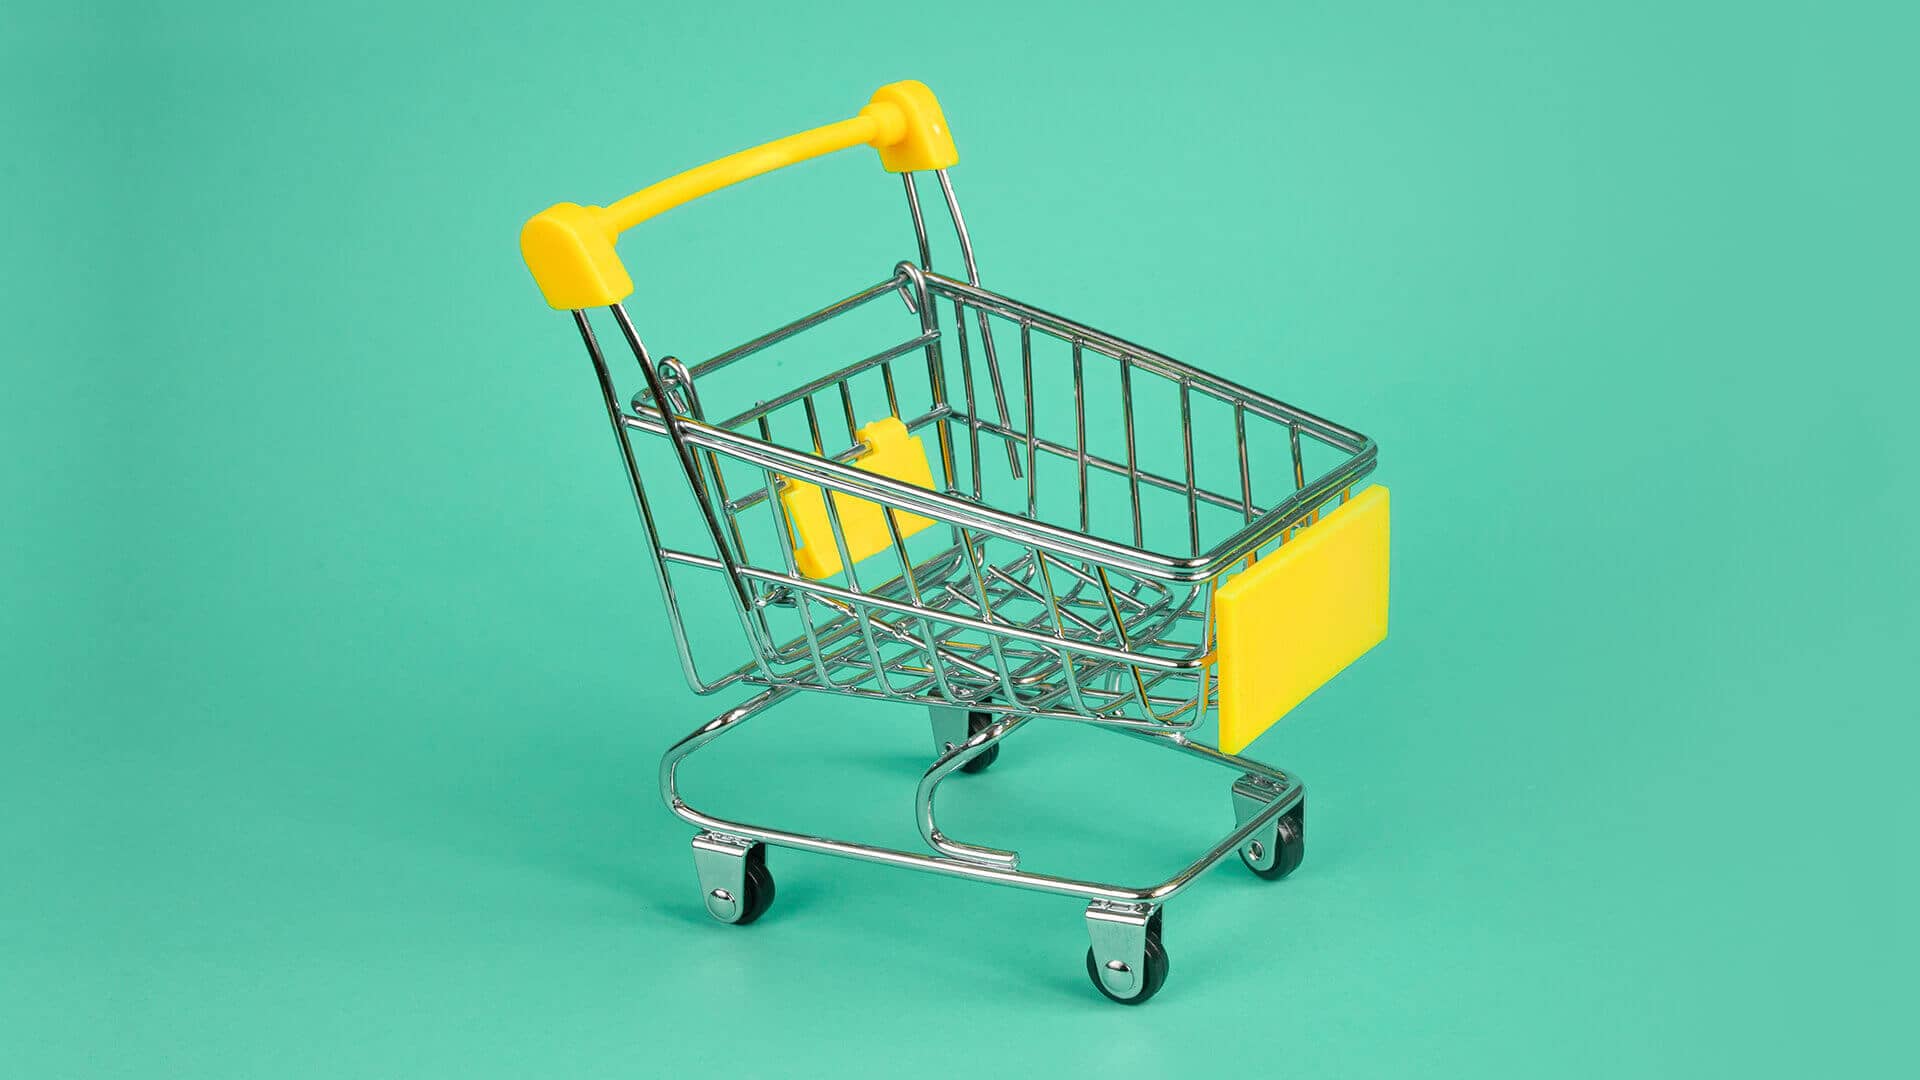 A shopping trolley on a green background